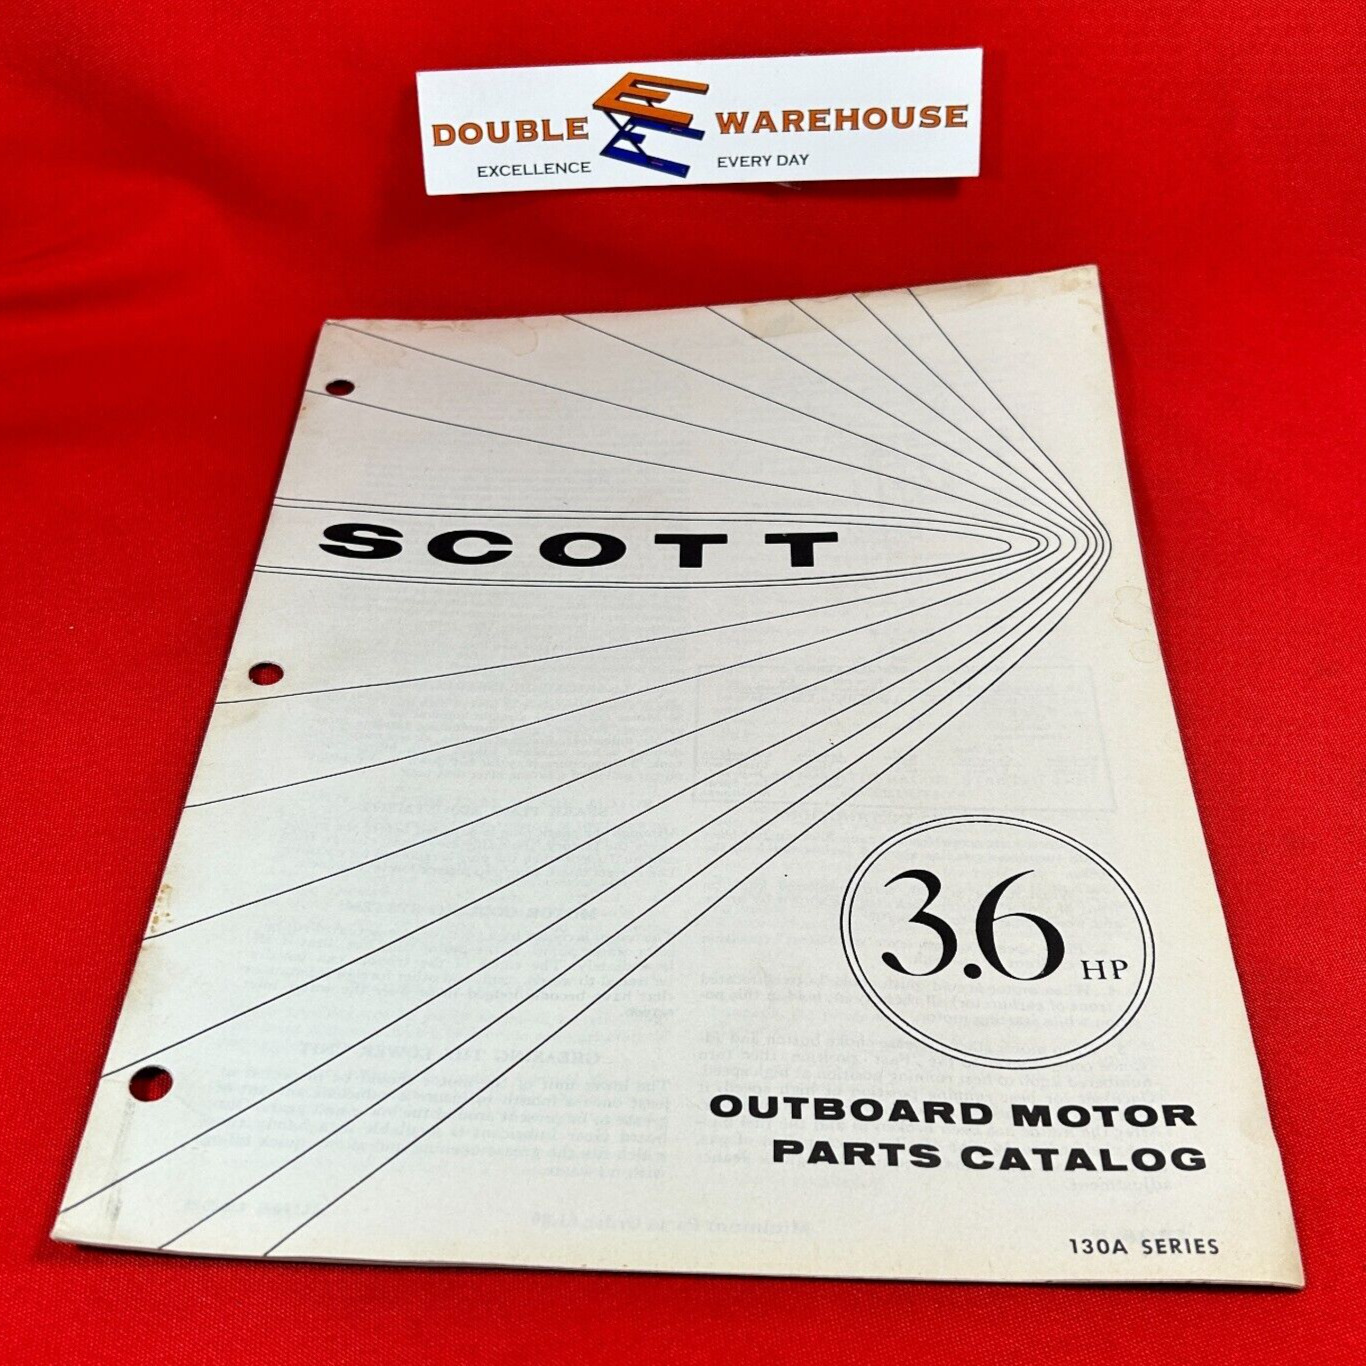 1958 Scott 3.6 HP 130A Series Outboard Motor Parts Catalog 130A-8714 McCulloch